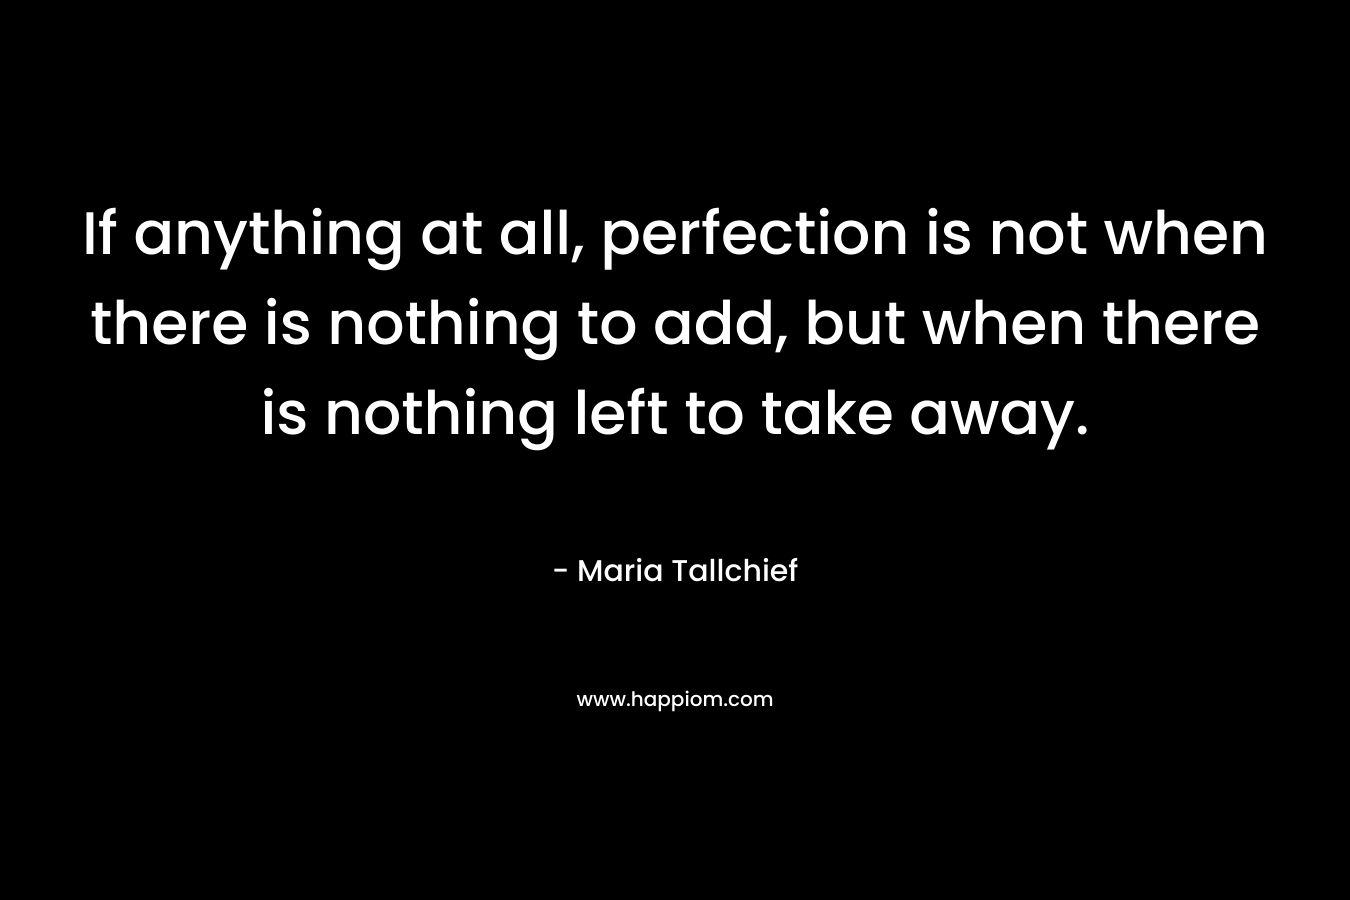 If anything at all, perfection is not when there is nothing to add, but when there is nothing left to take away. – Maria Tallchief